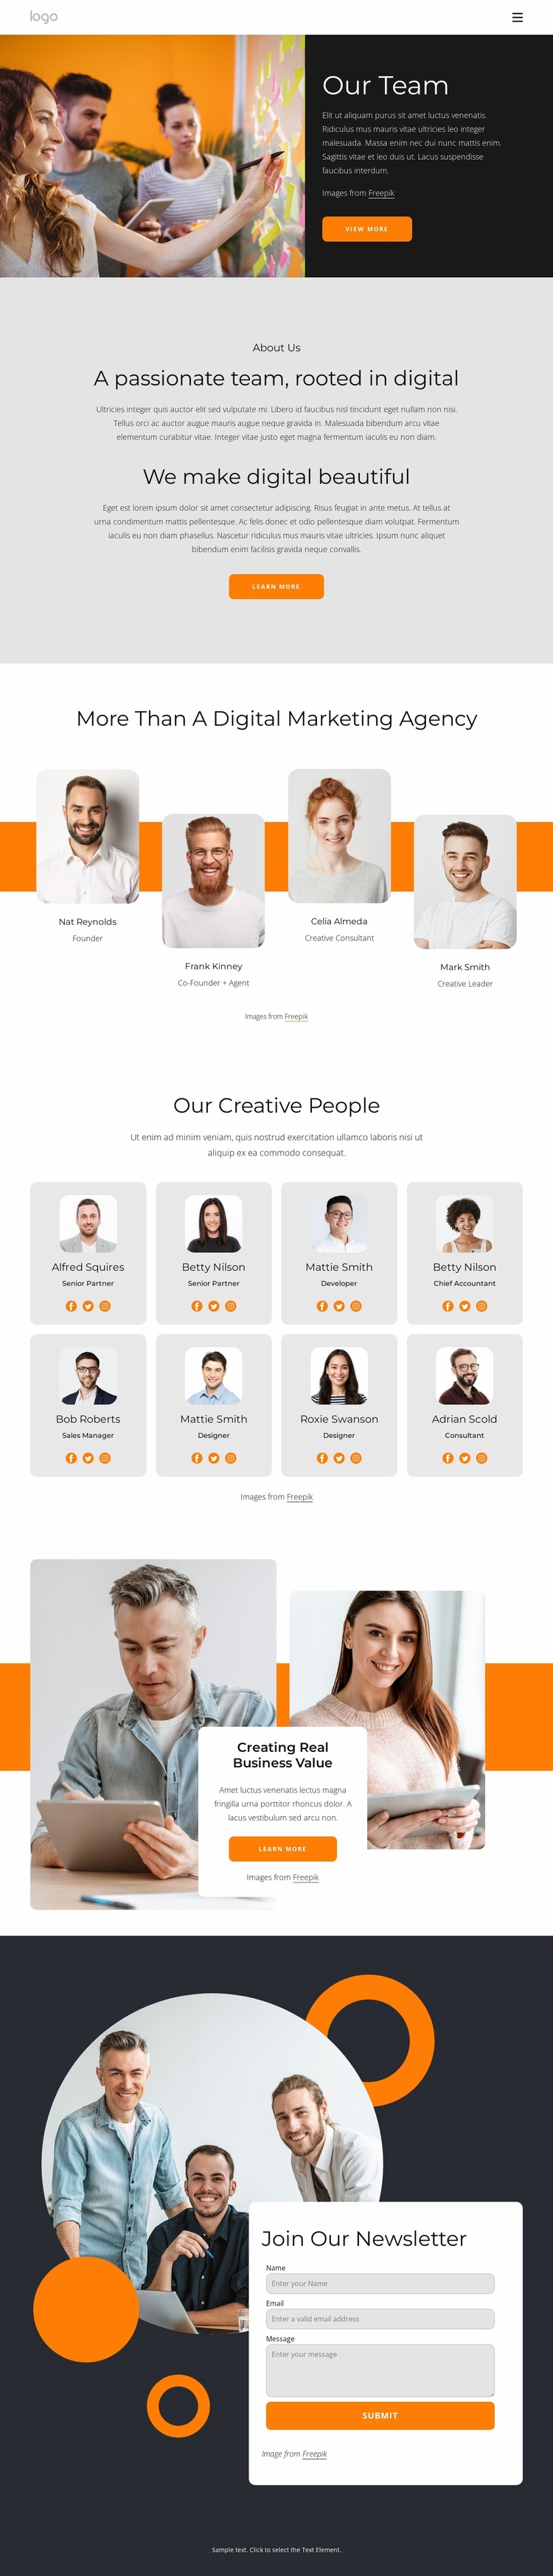 We are creative people with big dreams Website Builder Templates